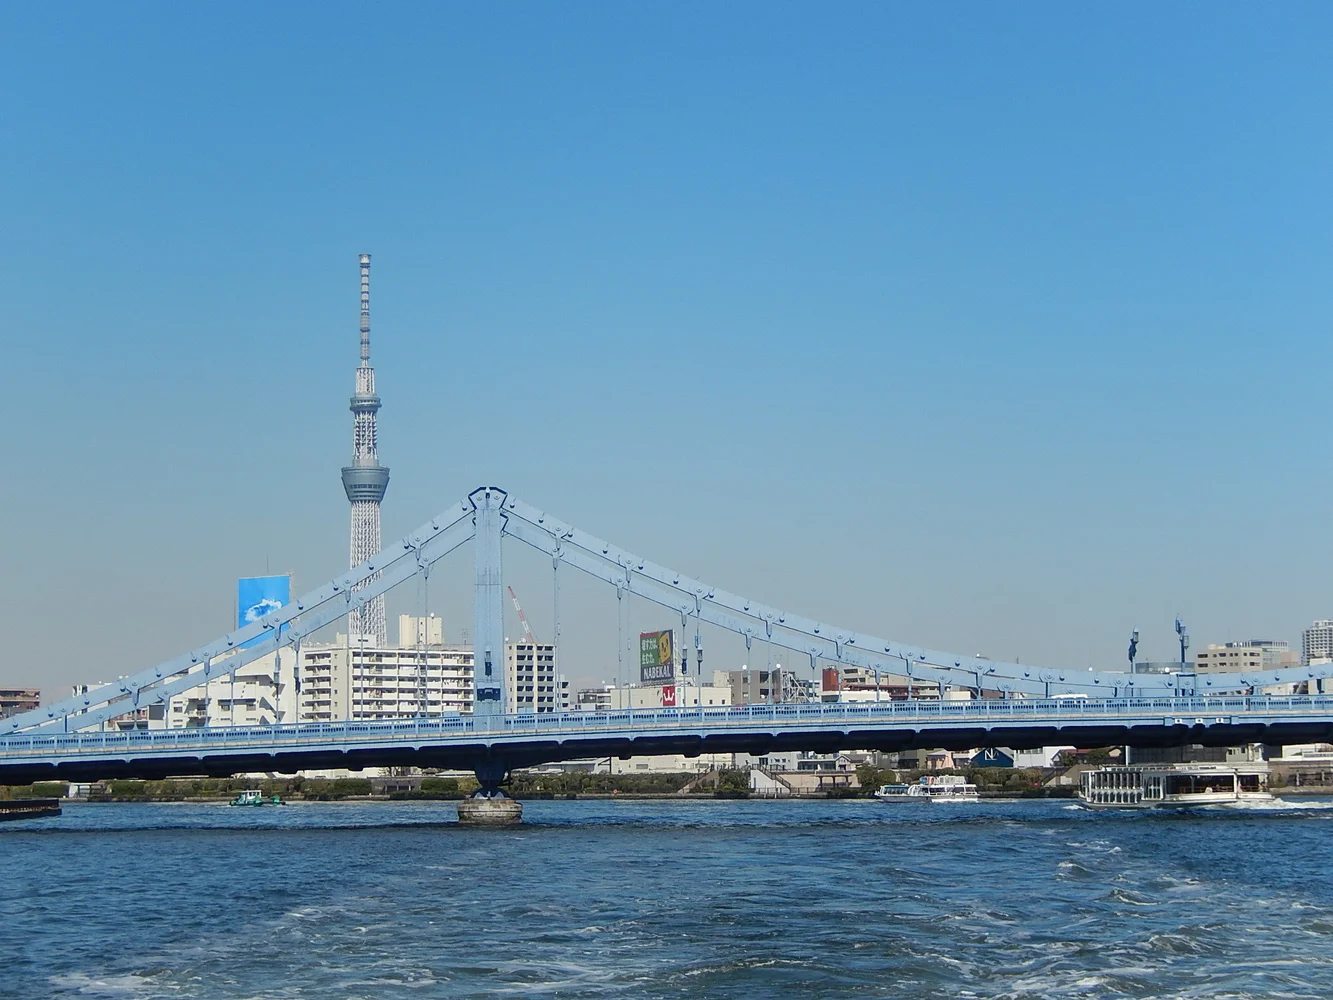 Enjoy a Tokyo half or full day tour with Sumida river cruise